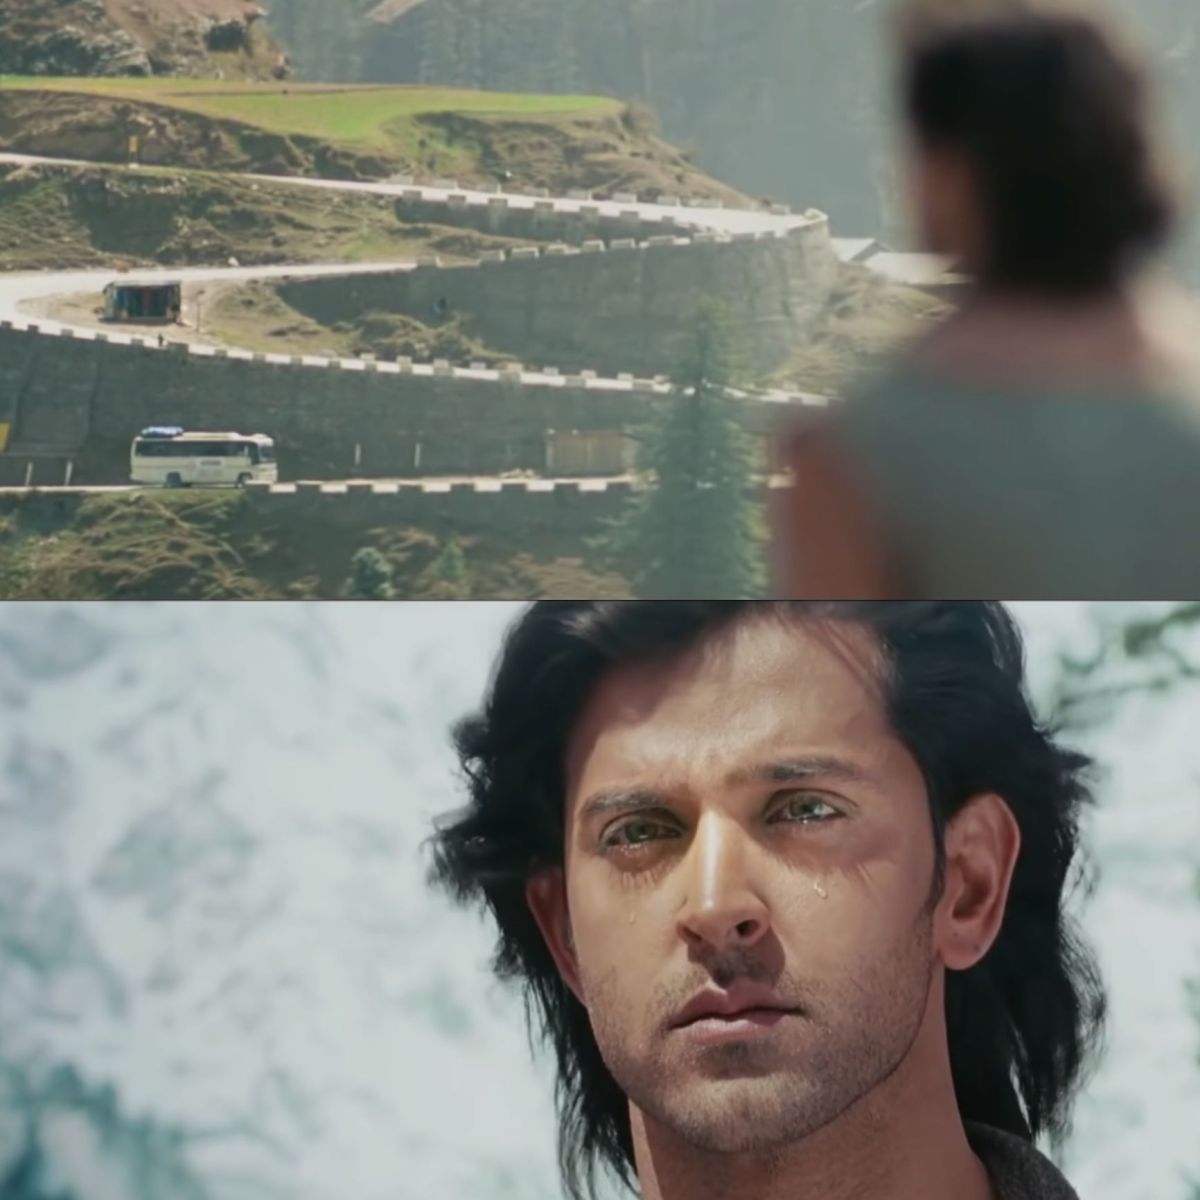 Hrithik Roshan in tears while looking at a bus